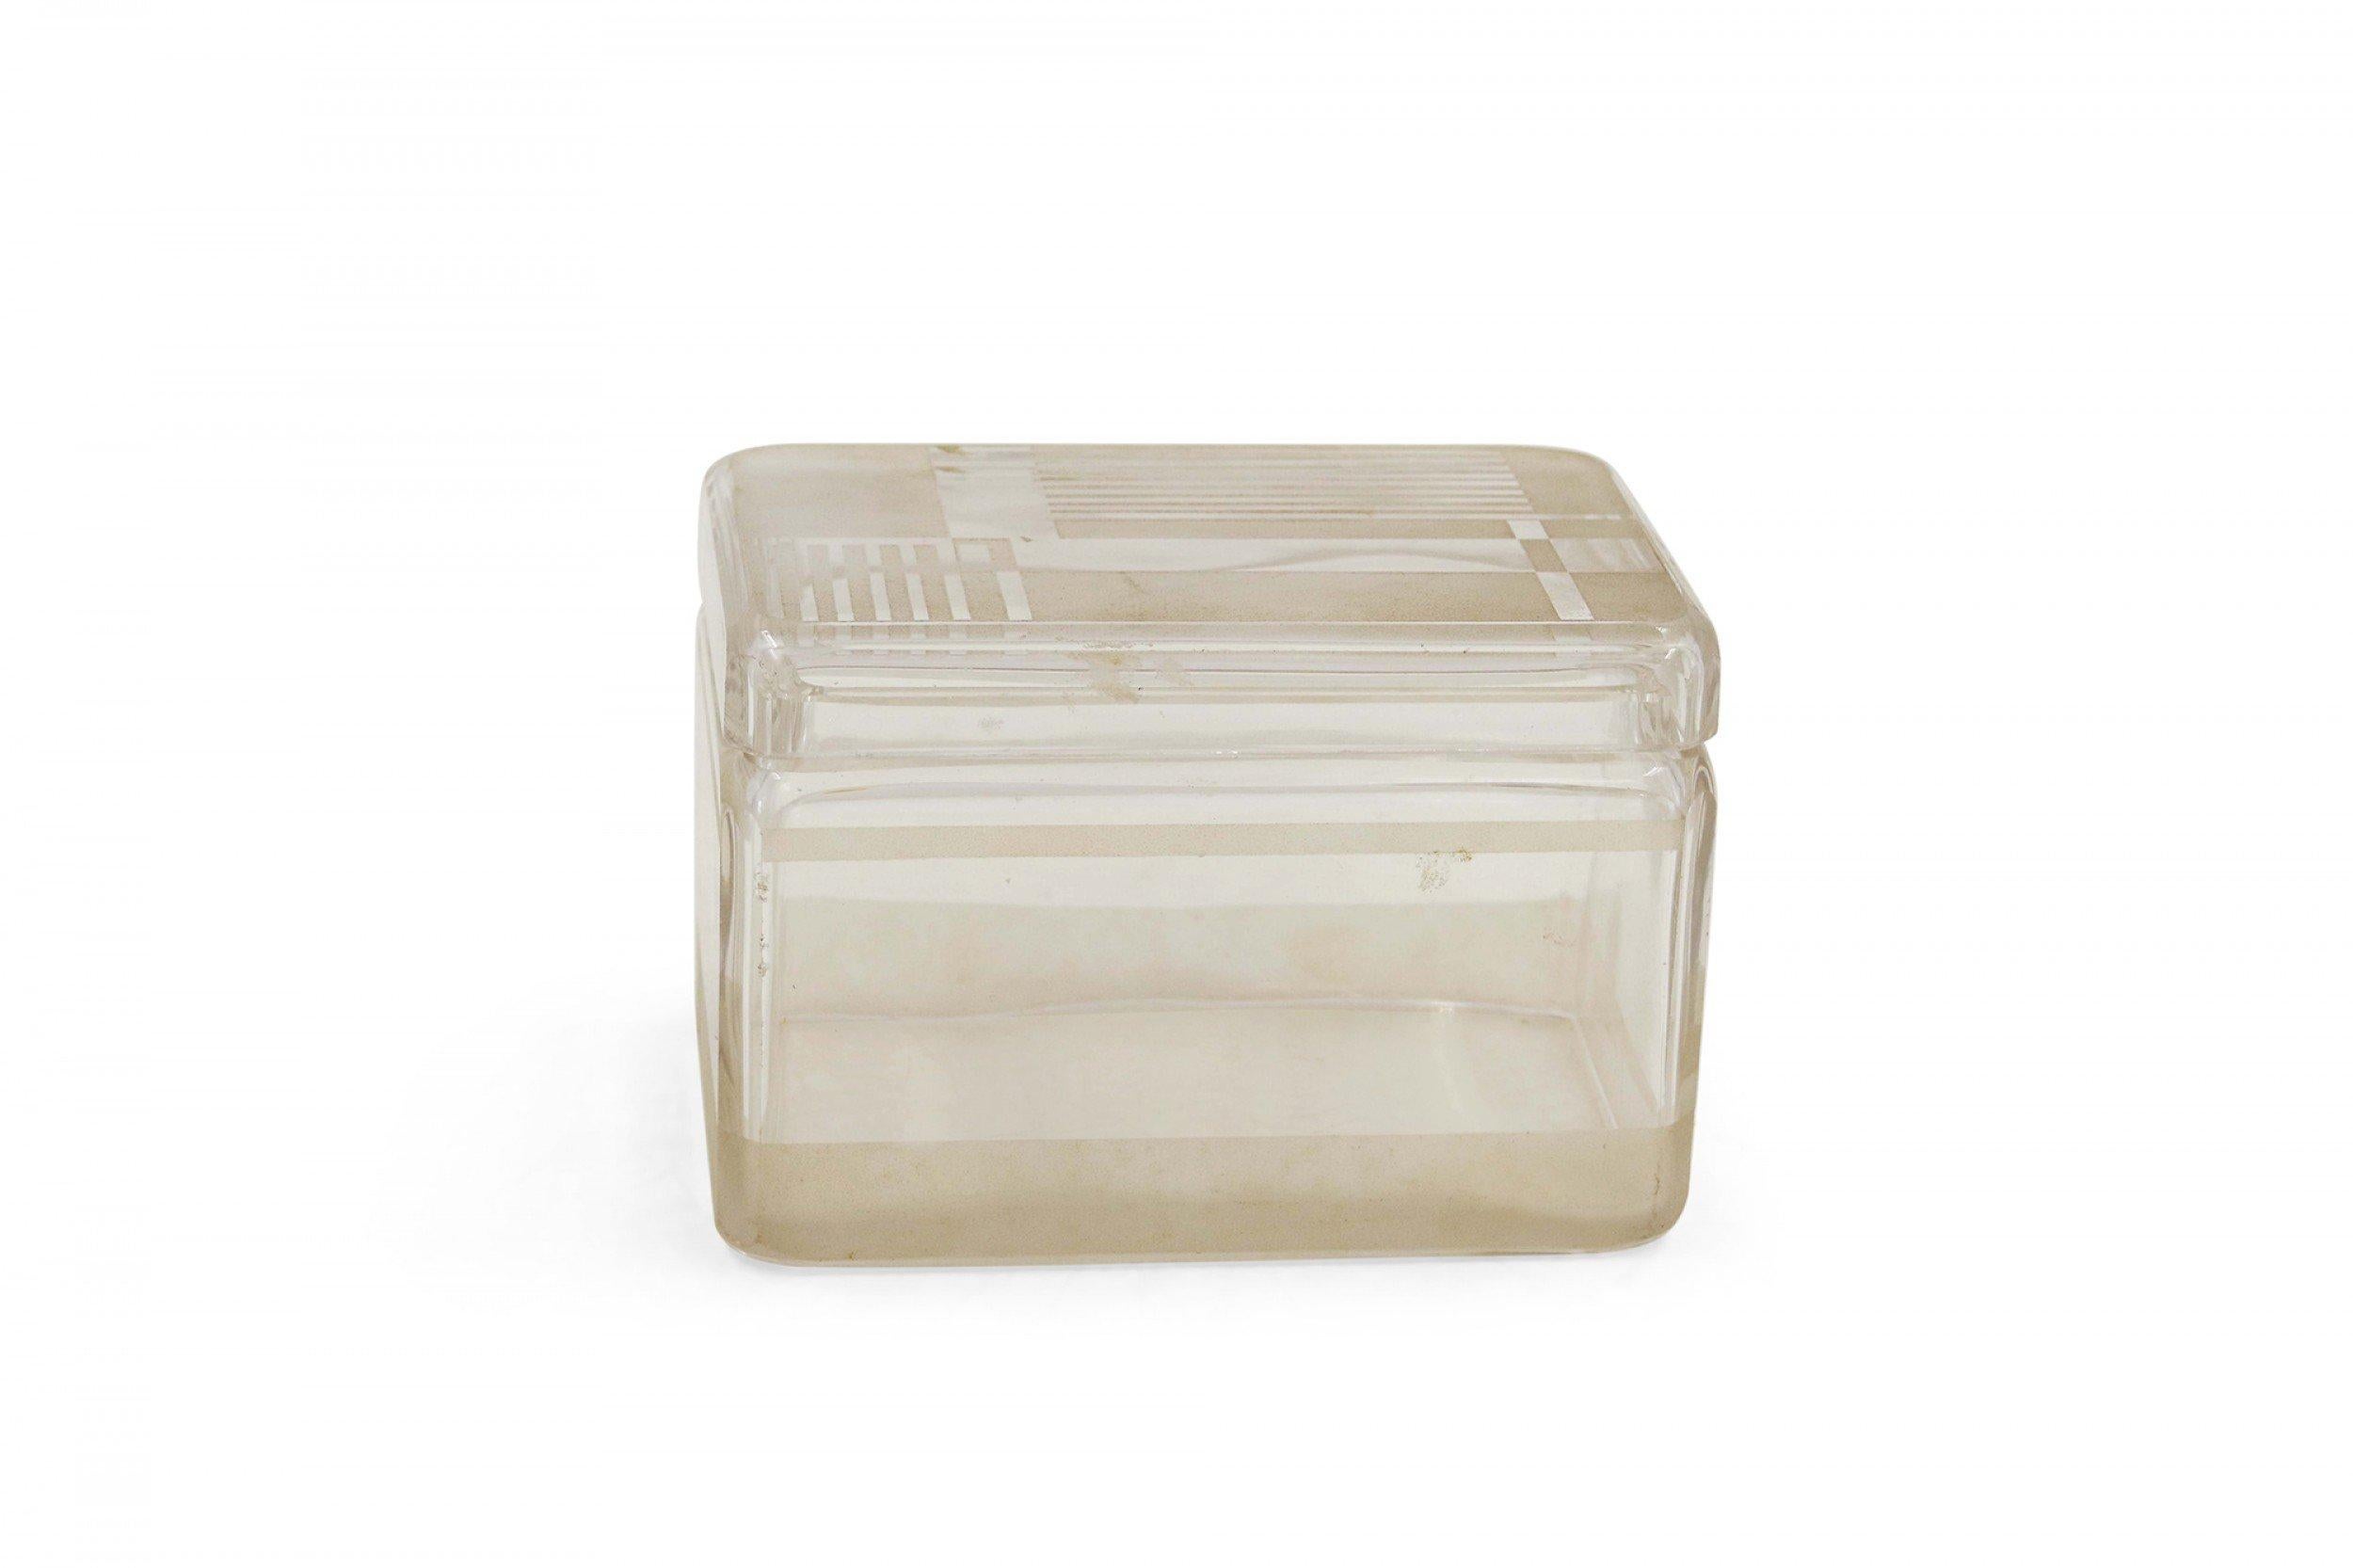 French Art Deco Frosted Geometric Design Lidded Glass Box For Sale 1